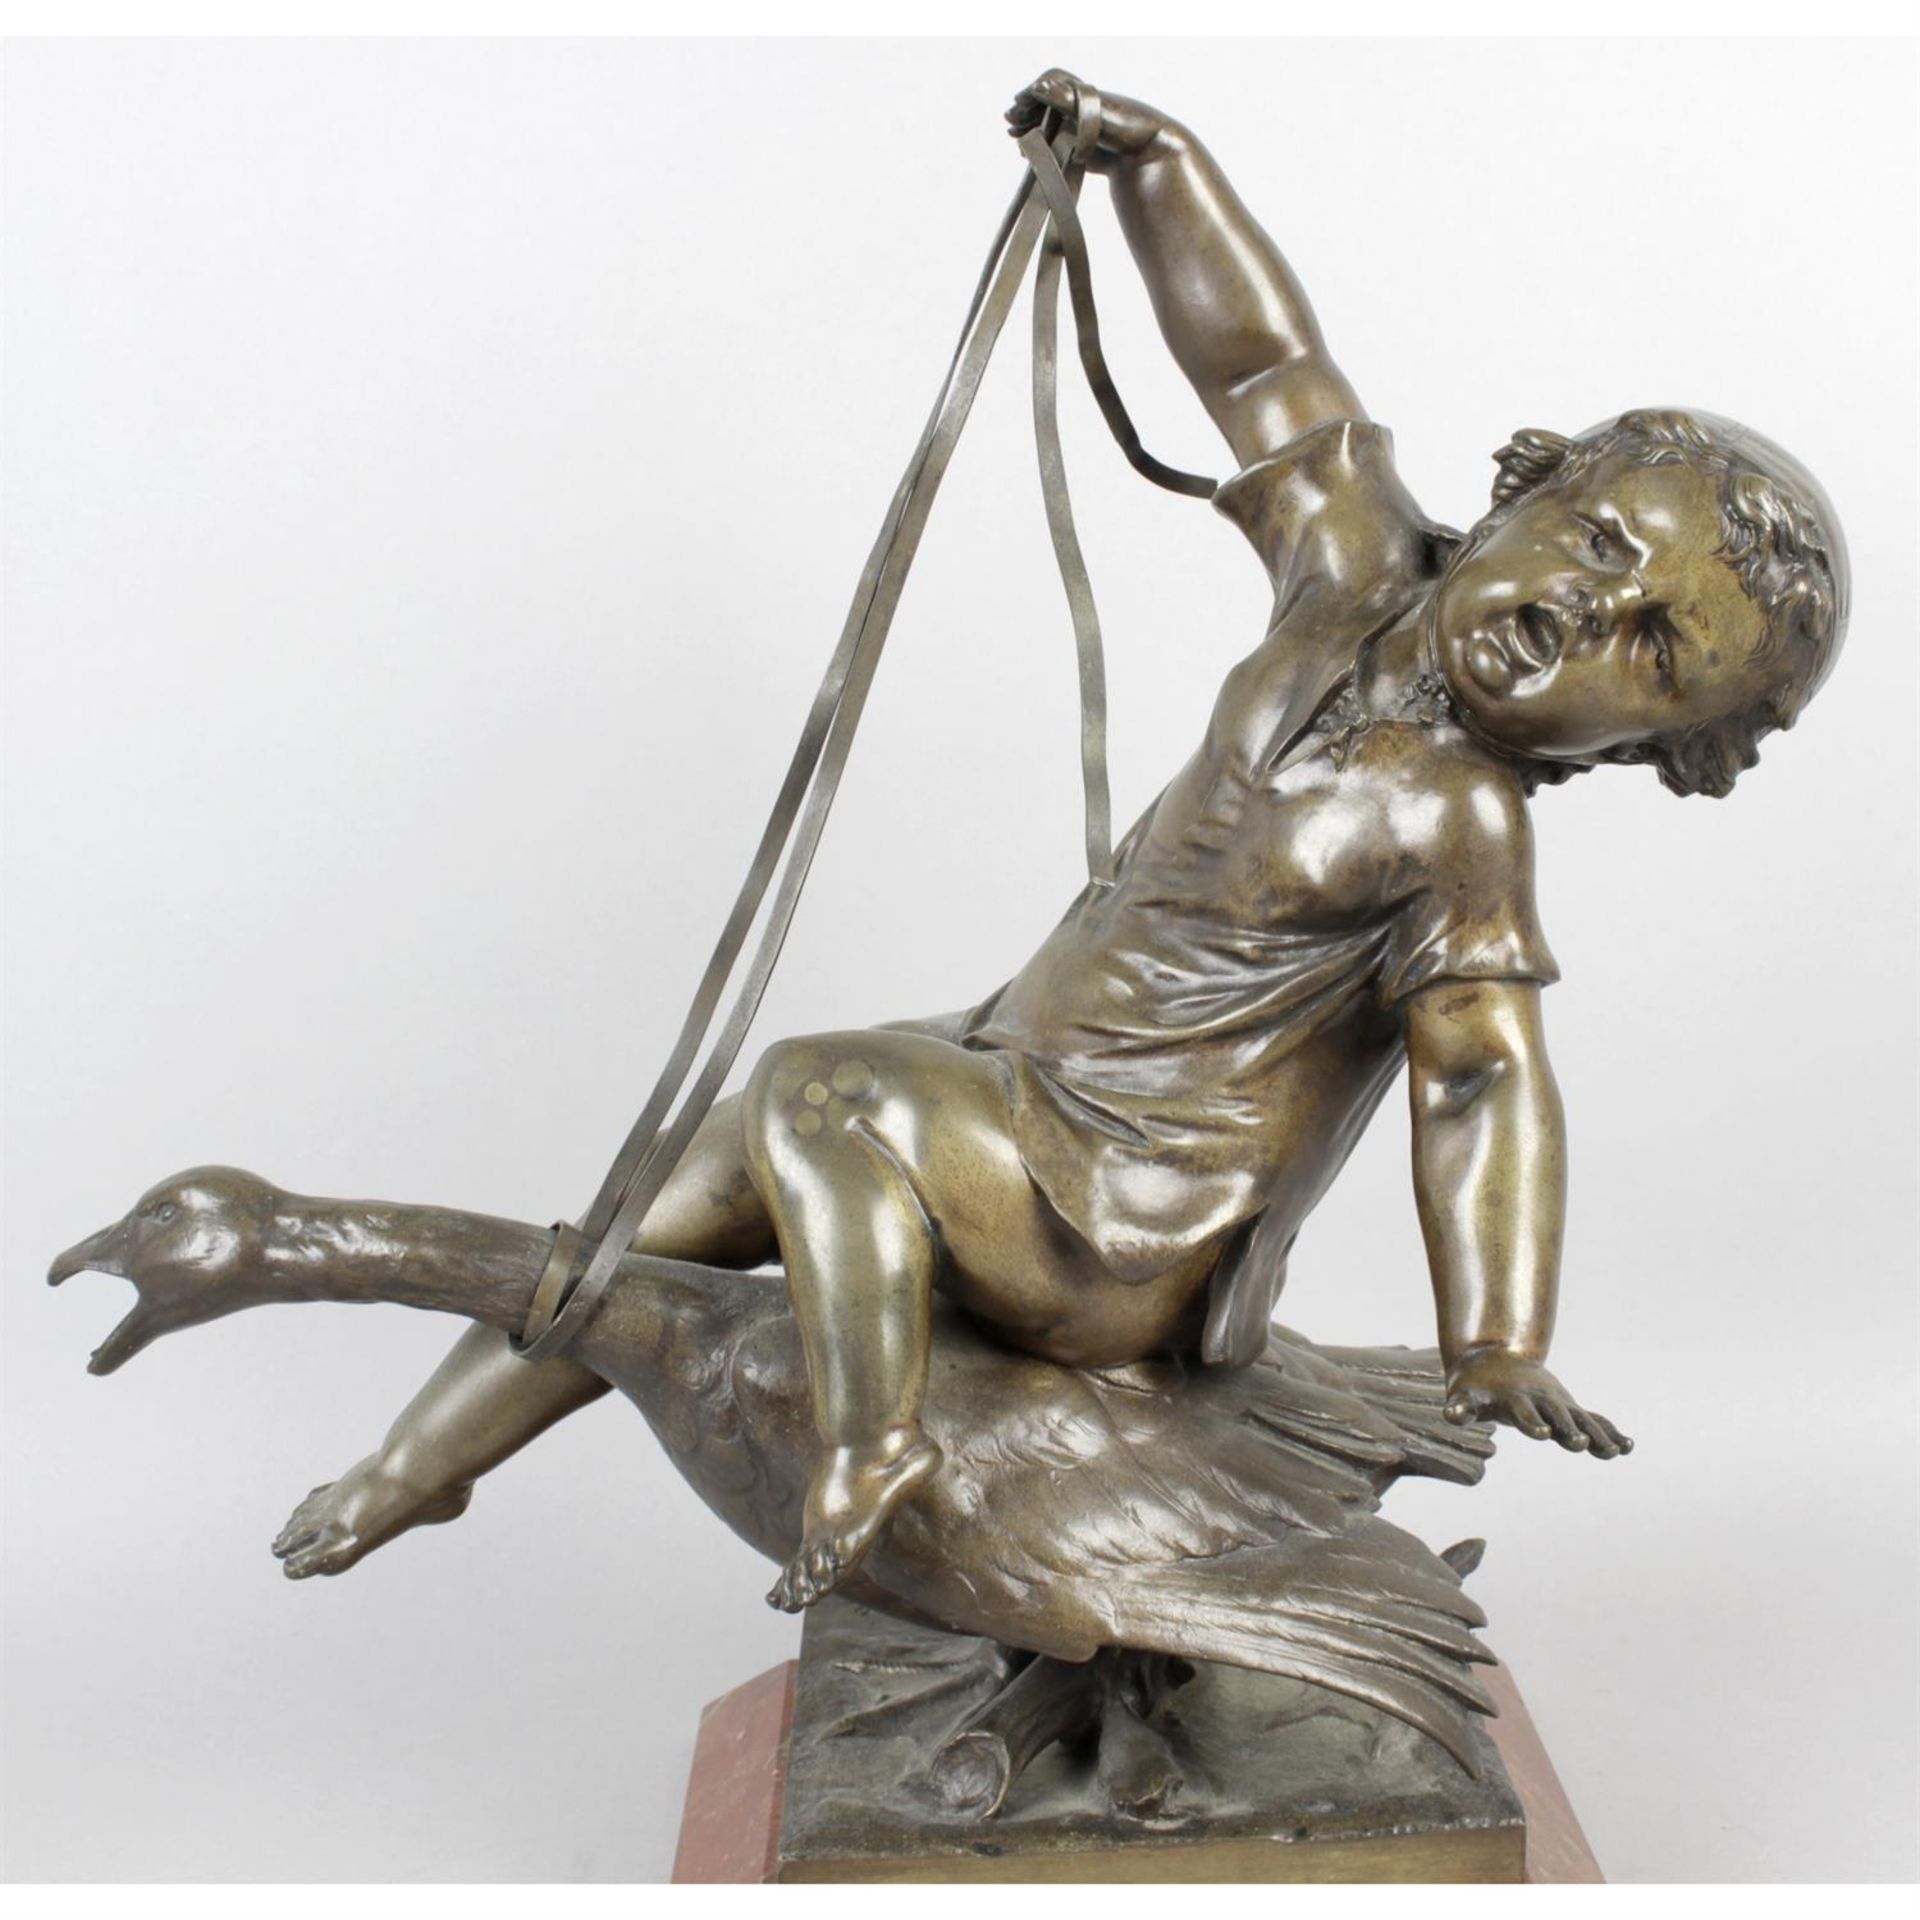 Dinee, a bronze figure group modelled as a young child seated on goose. - Image 2 of 5